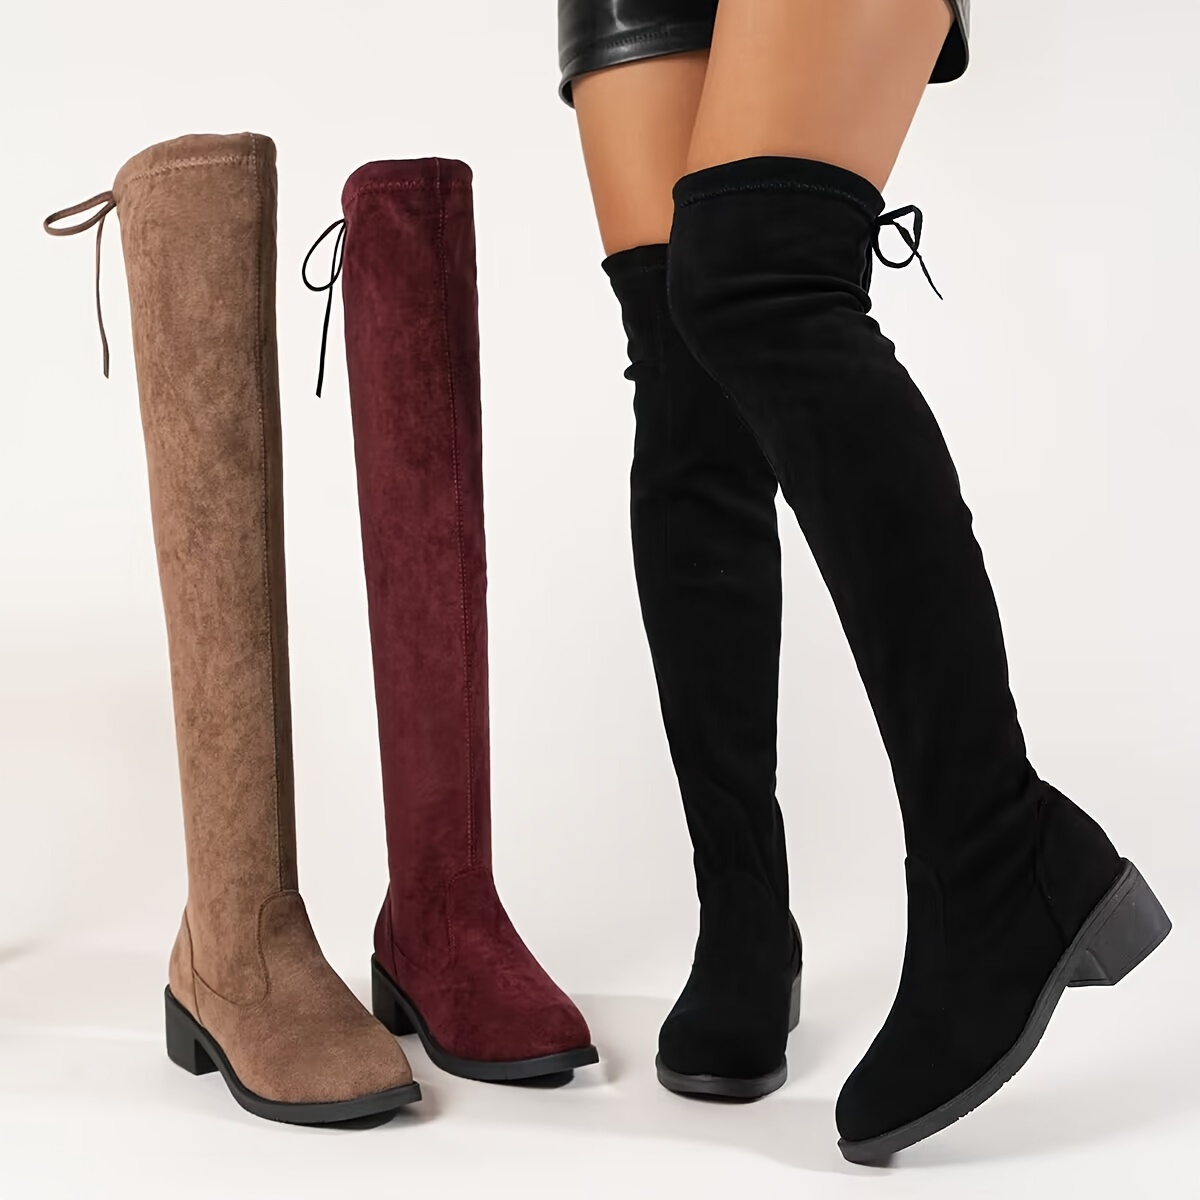 Slim Over The Knee Stretch Socks Boots Long Boots Woman Anti-slip